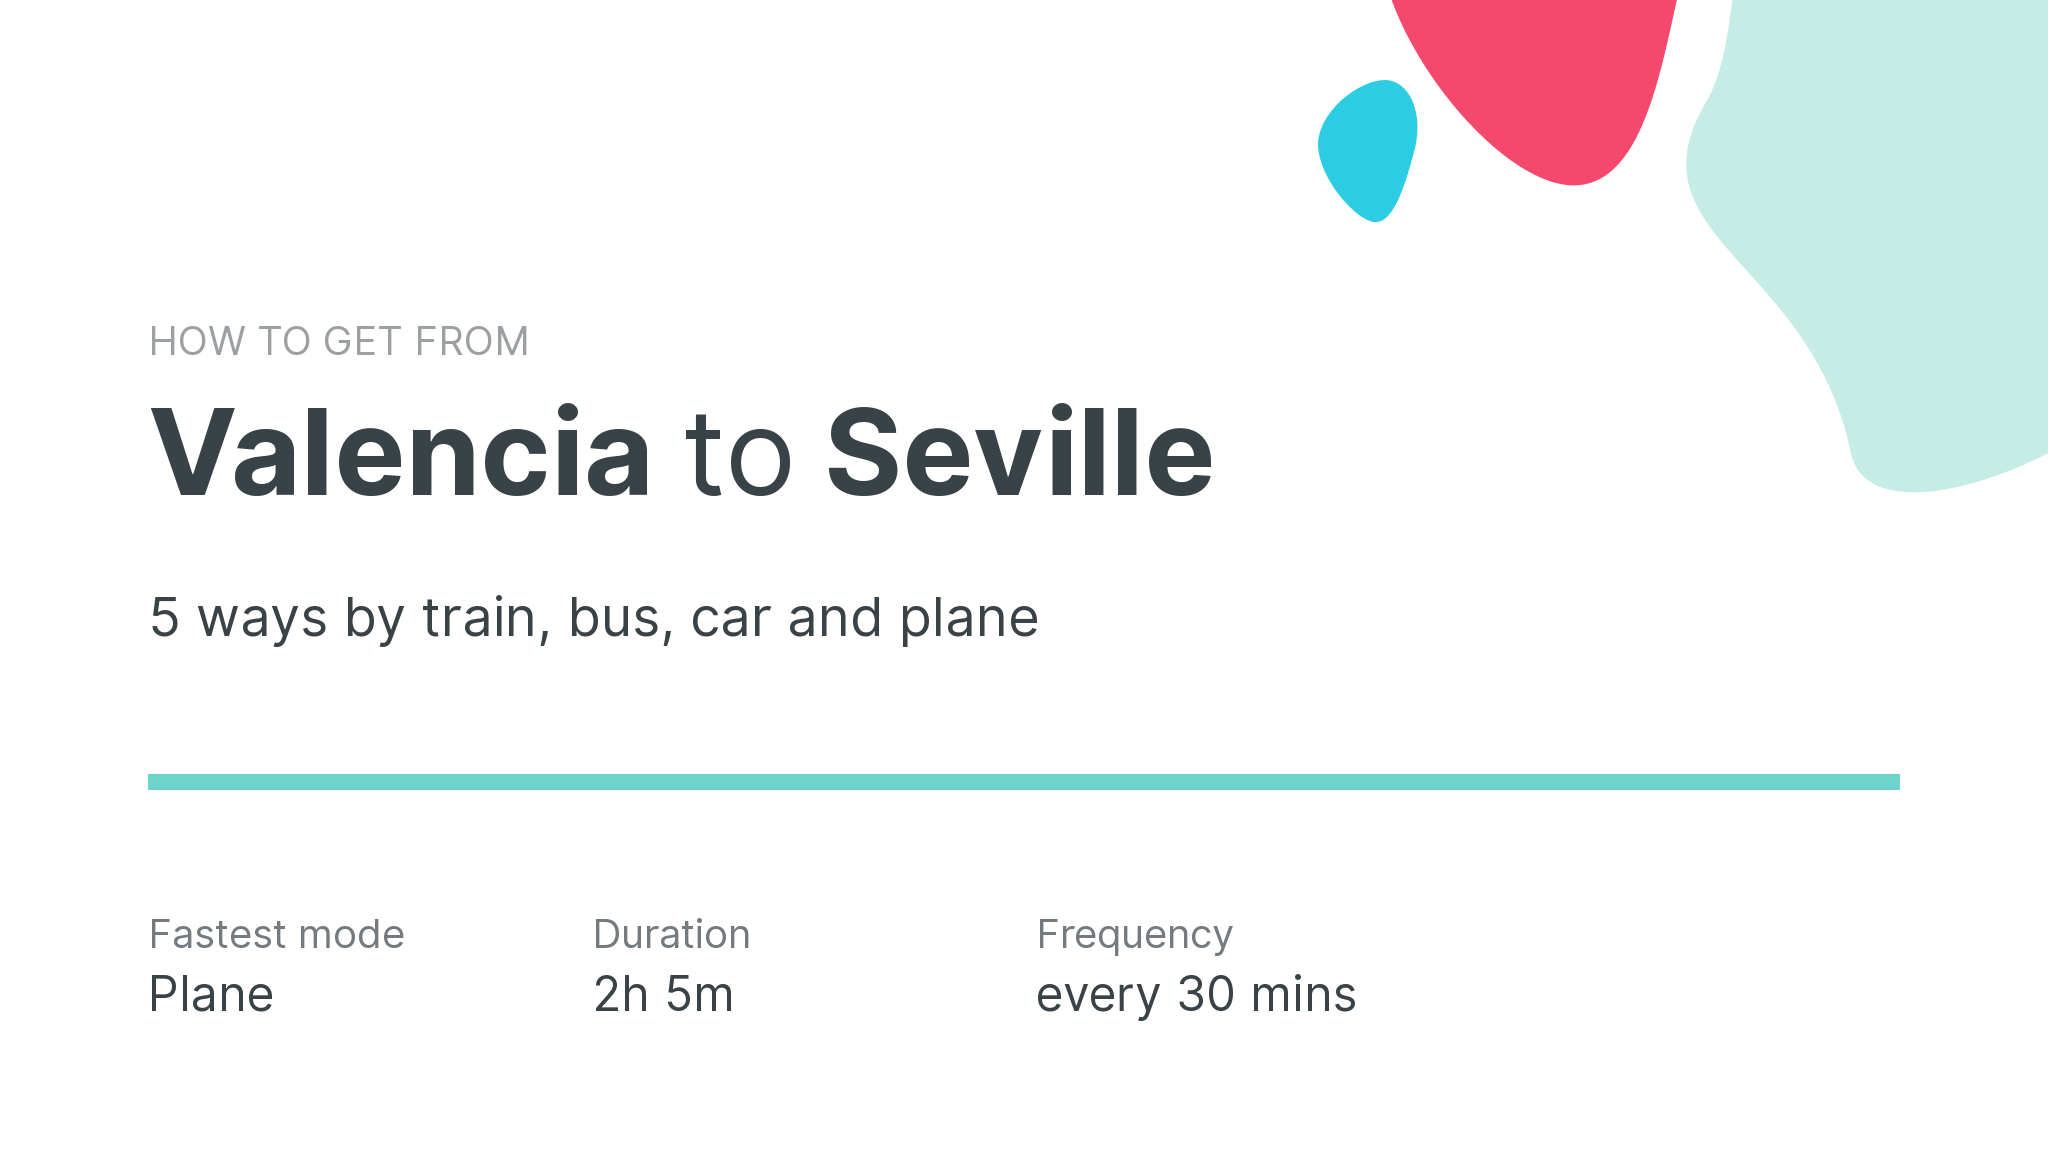 How do I get from Valencia to Seville